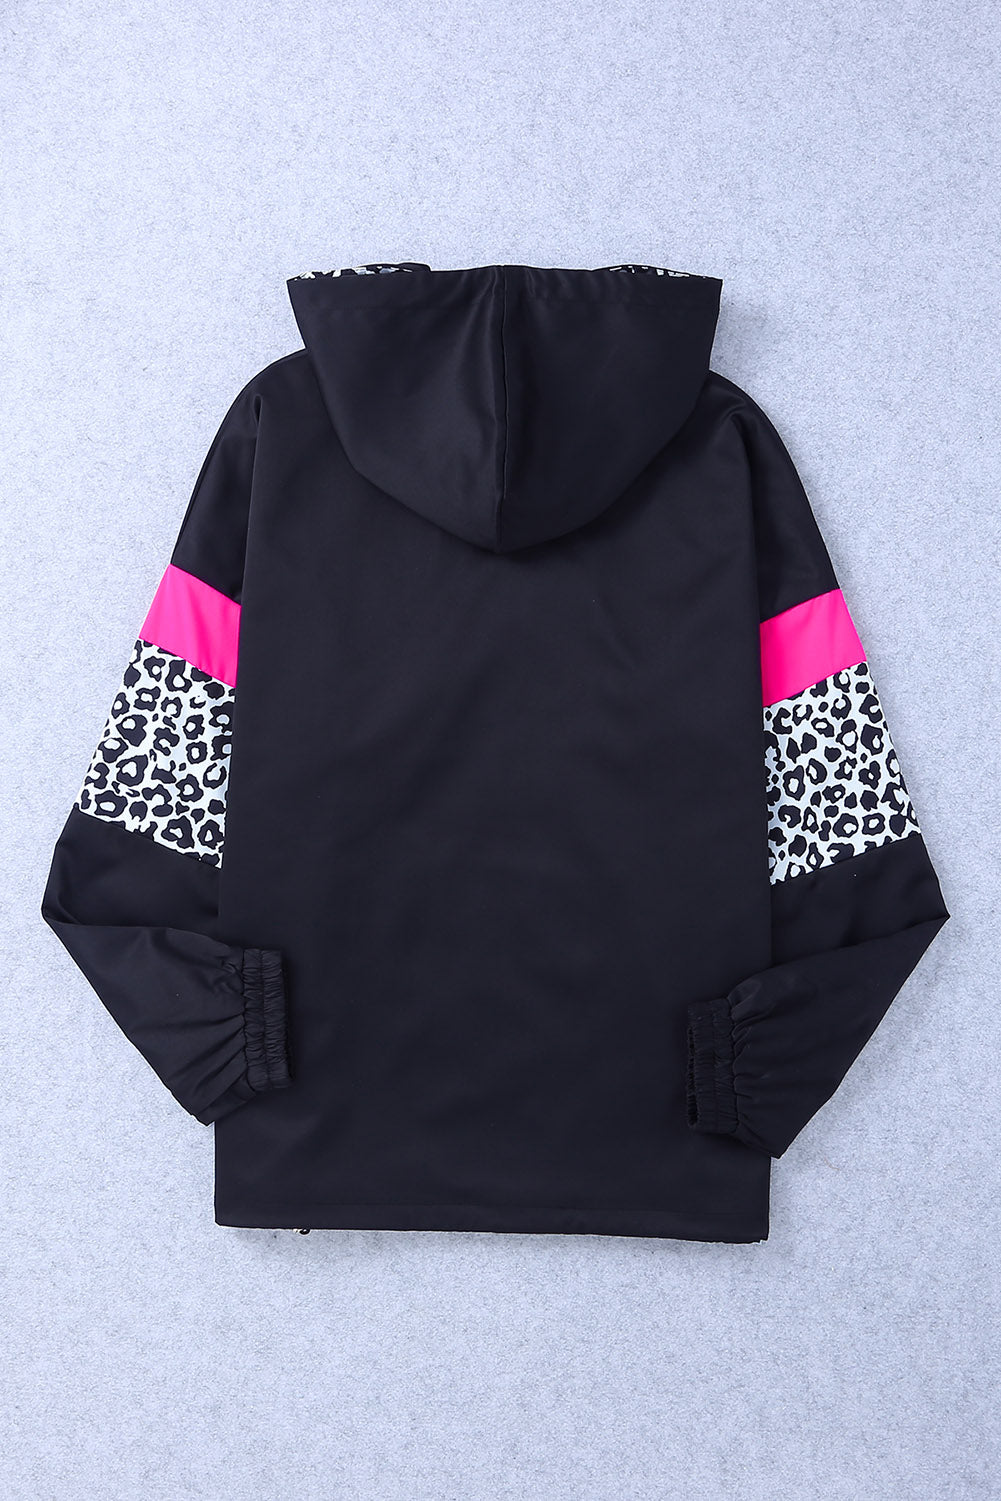 Leopard Color Block Zip-Up Hooded Jacket The Stout Steer